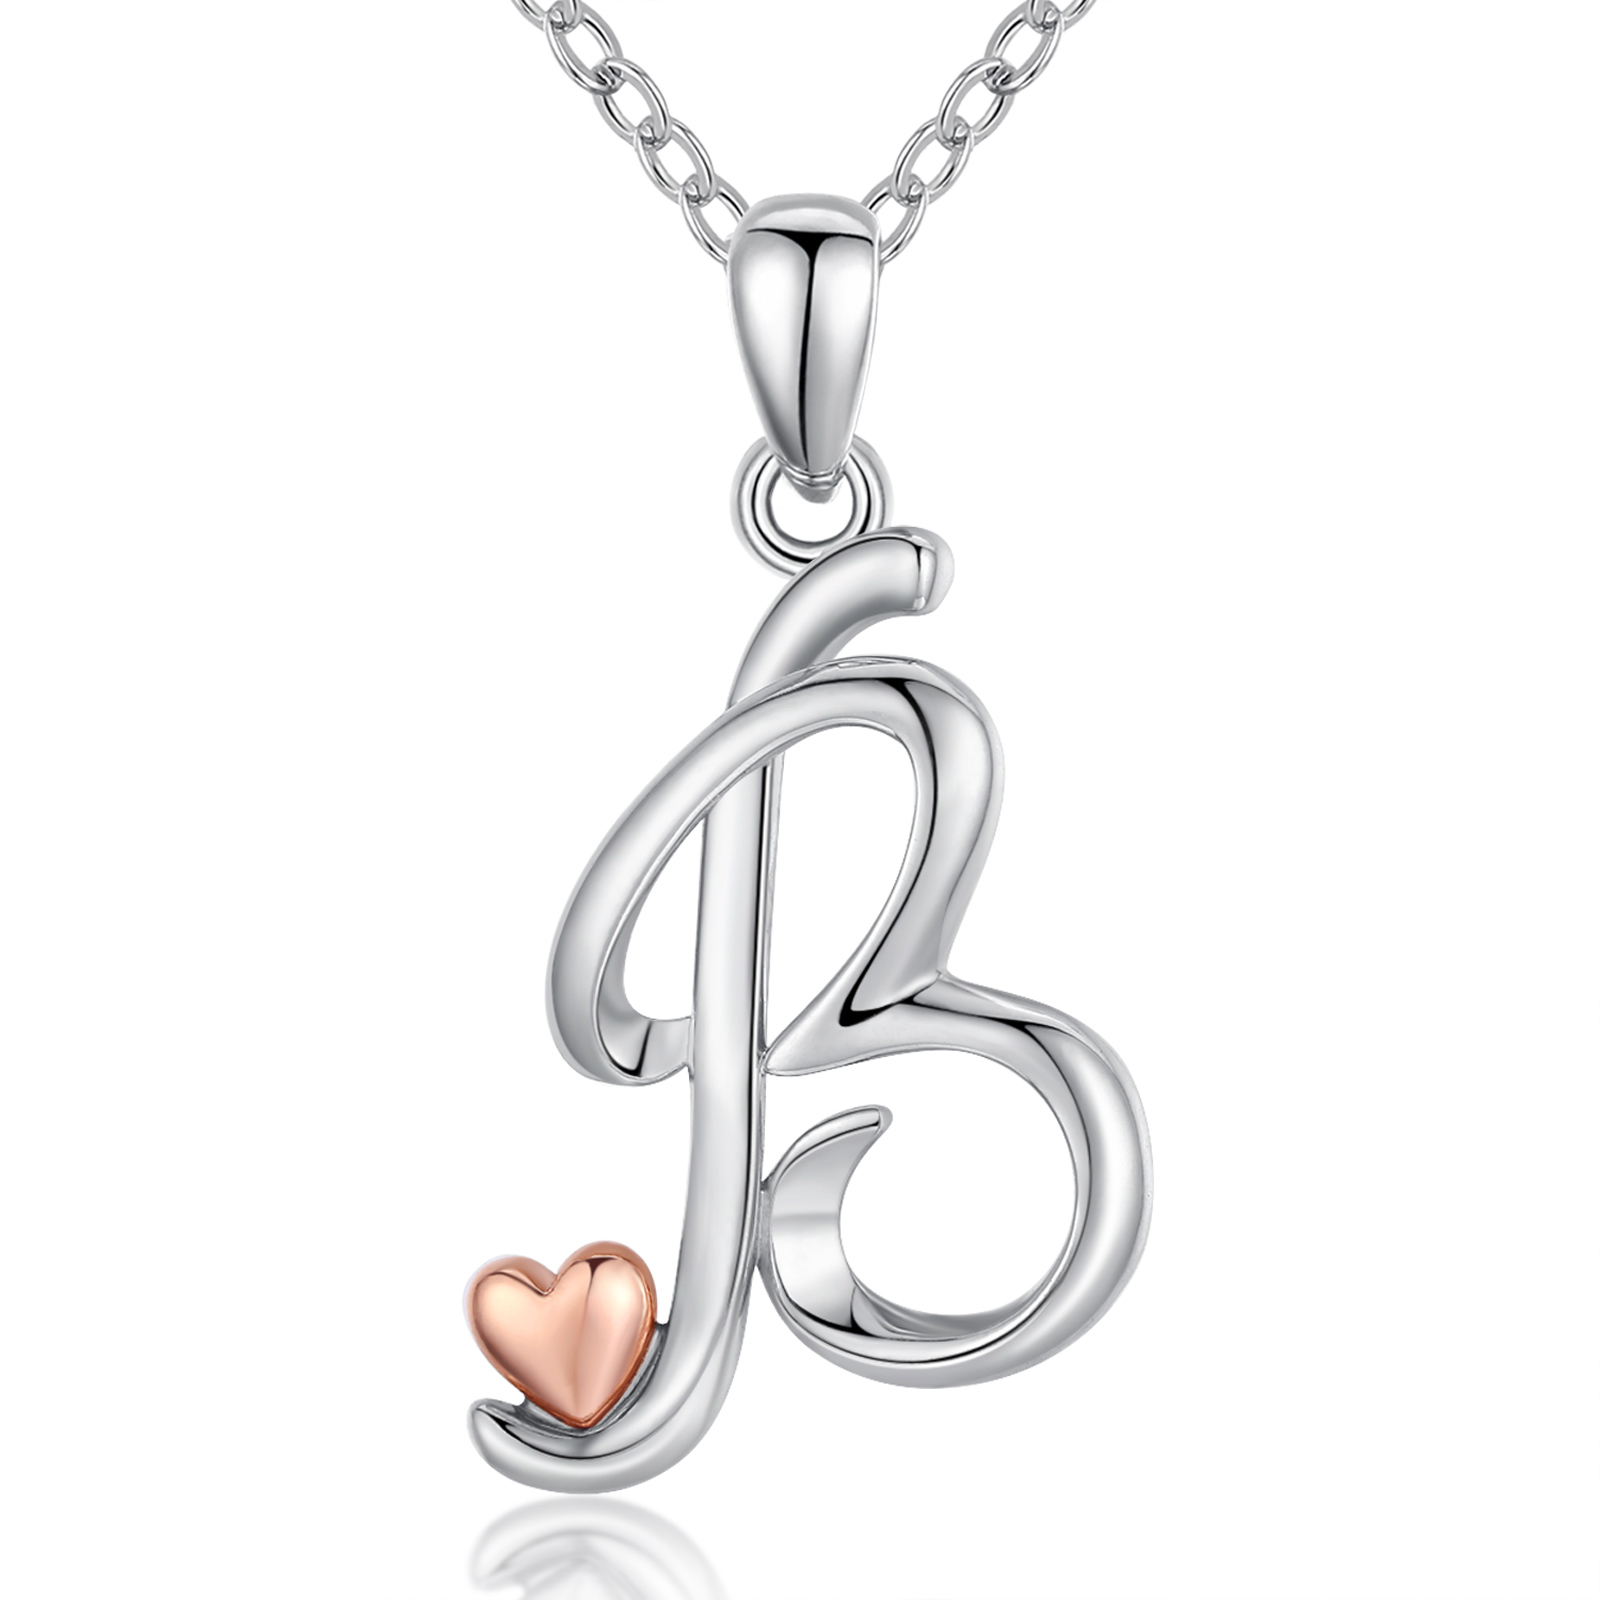 Merryshine Jewelry s925 sterling silver plated rhodium initial letter B pendant necklace with rose gold heart